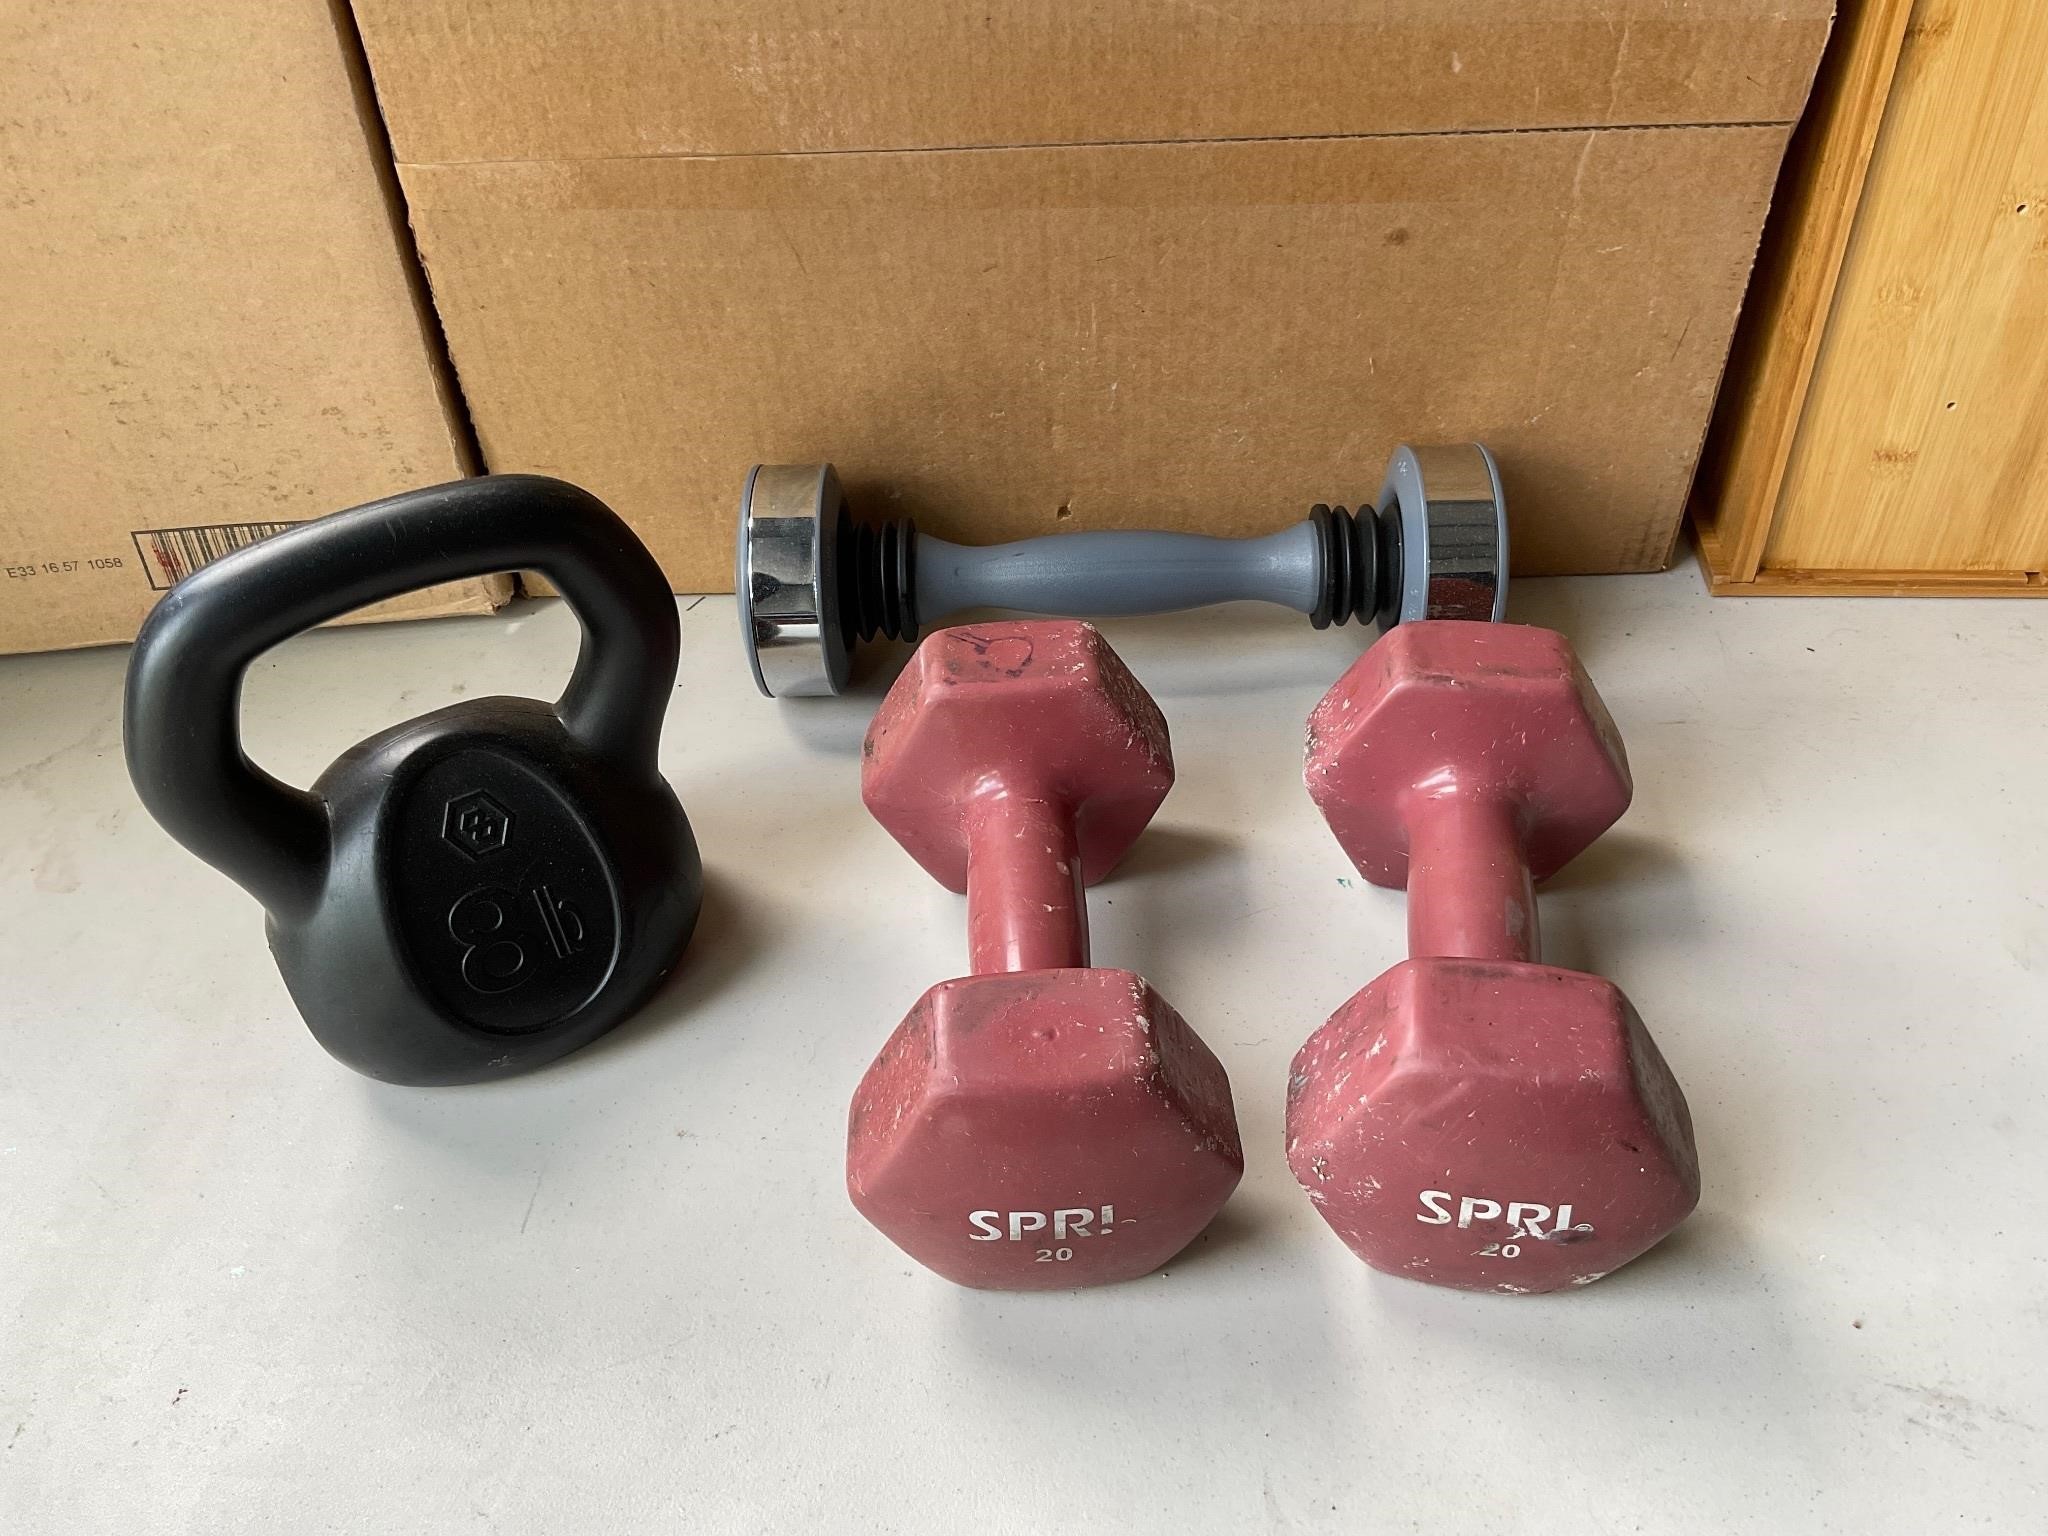 Lot of weights